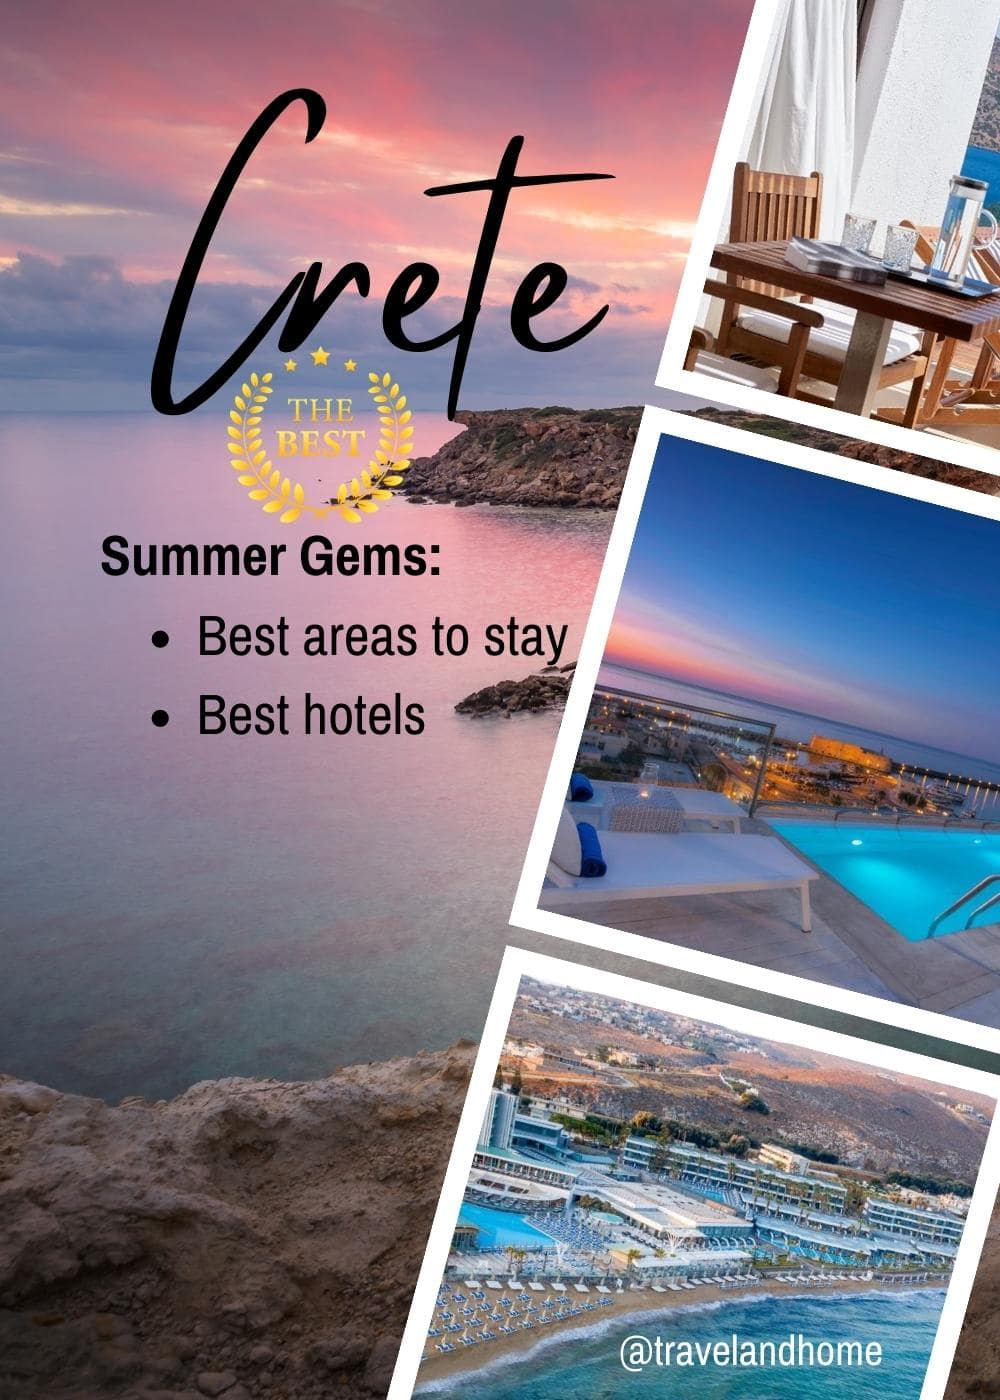 Cretes Summer Gems summer holidayBest Areas to Stay best hotels in Crete Greece travel and home min